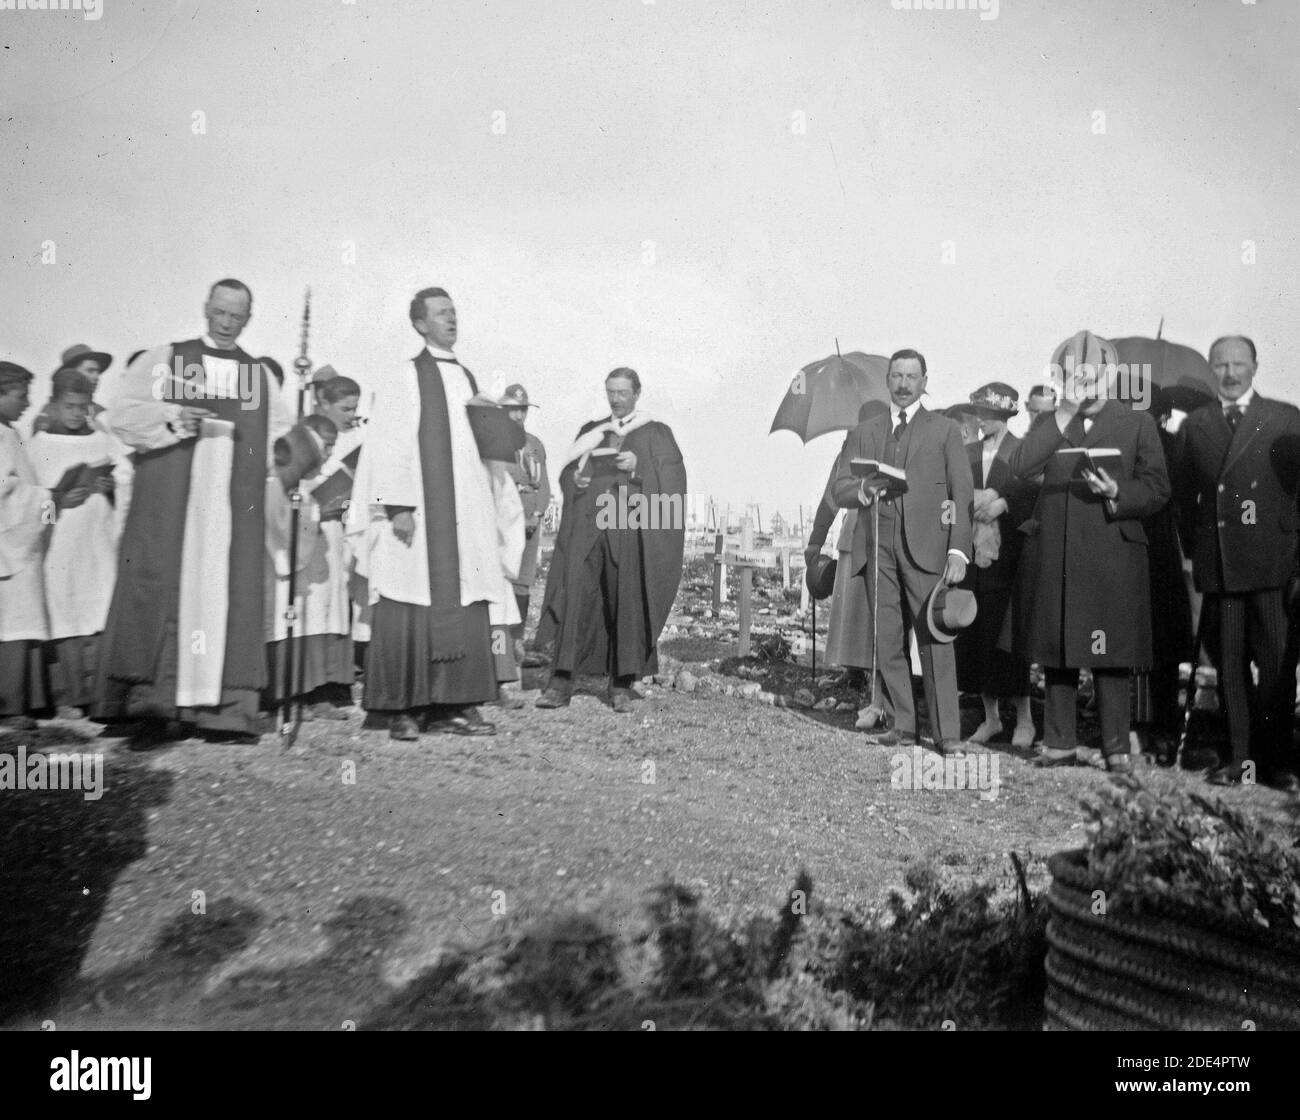 Middle East History - Men and women including possibly Winston Churchill and Herbert Samuel with Christian clergy in a military cemetery Stock Photo